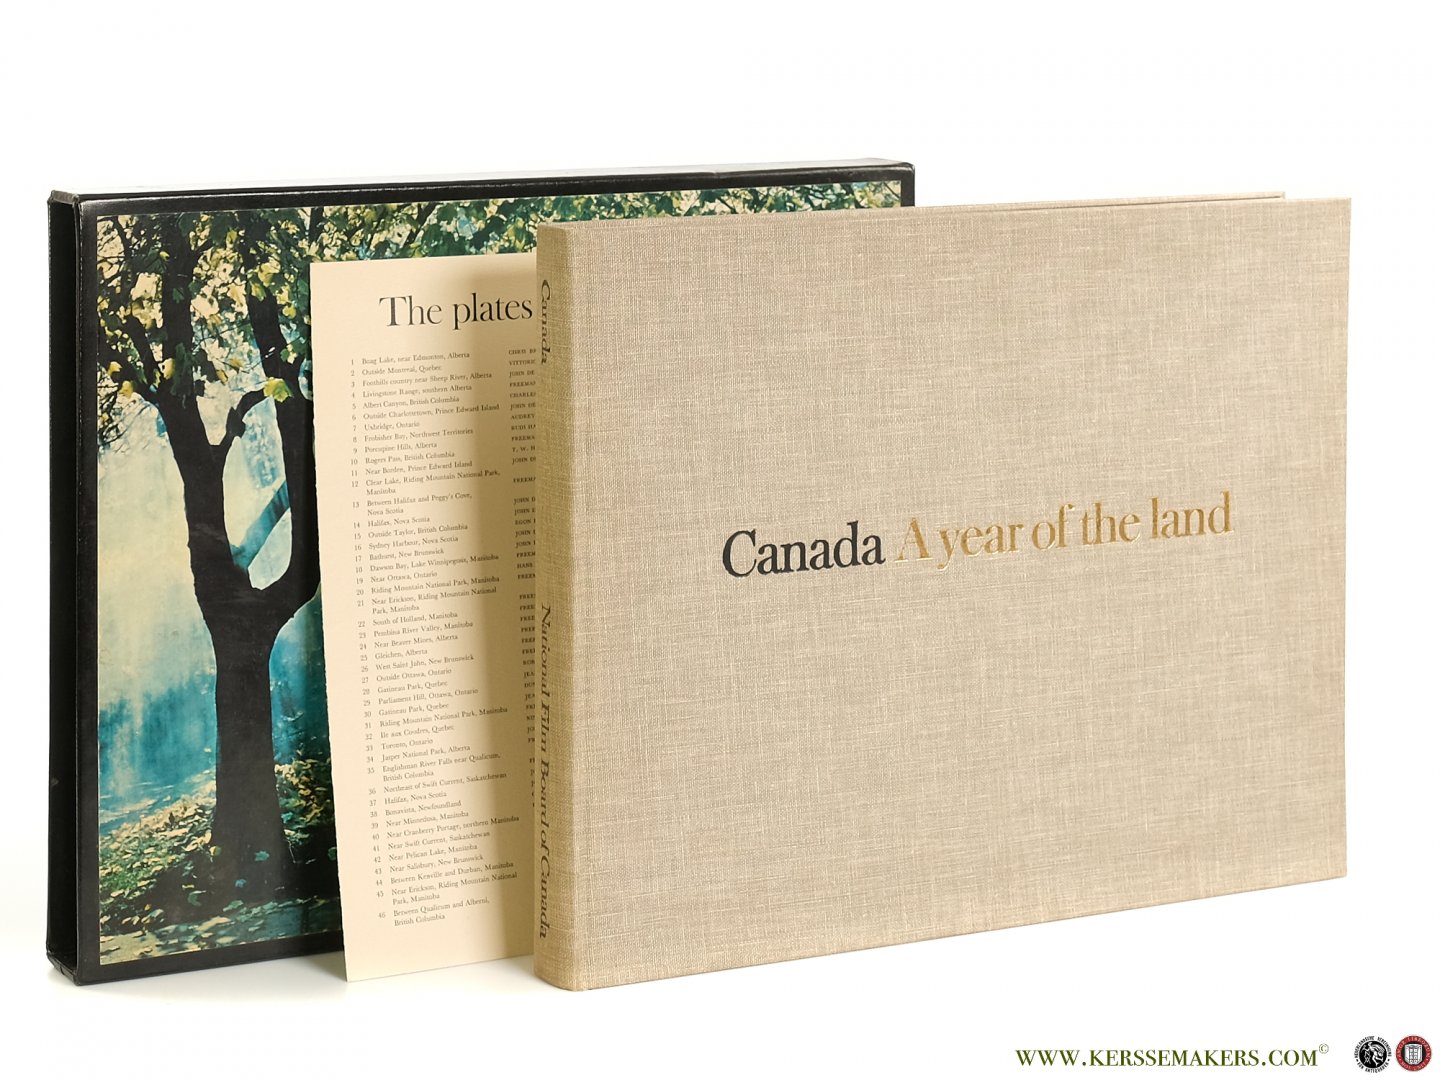 Hutchison, Bruce (text). - Canada / A year of the land. Produced by the National Film Board of Canada. Executive producer / Lorraine Monk. Design / Allan Fleming.